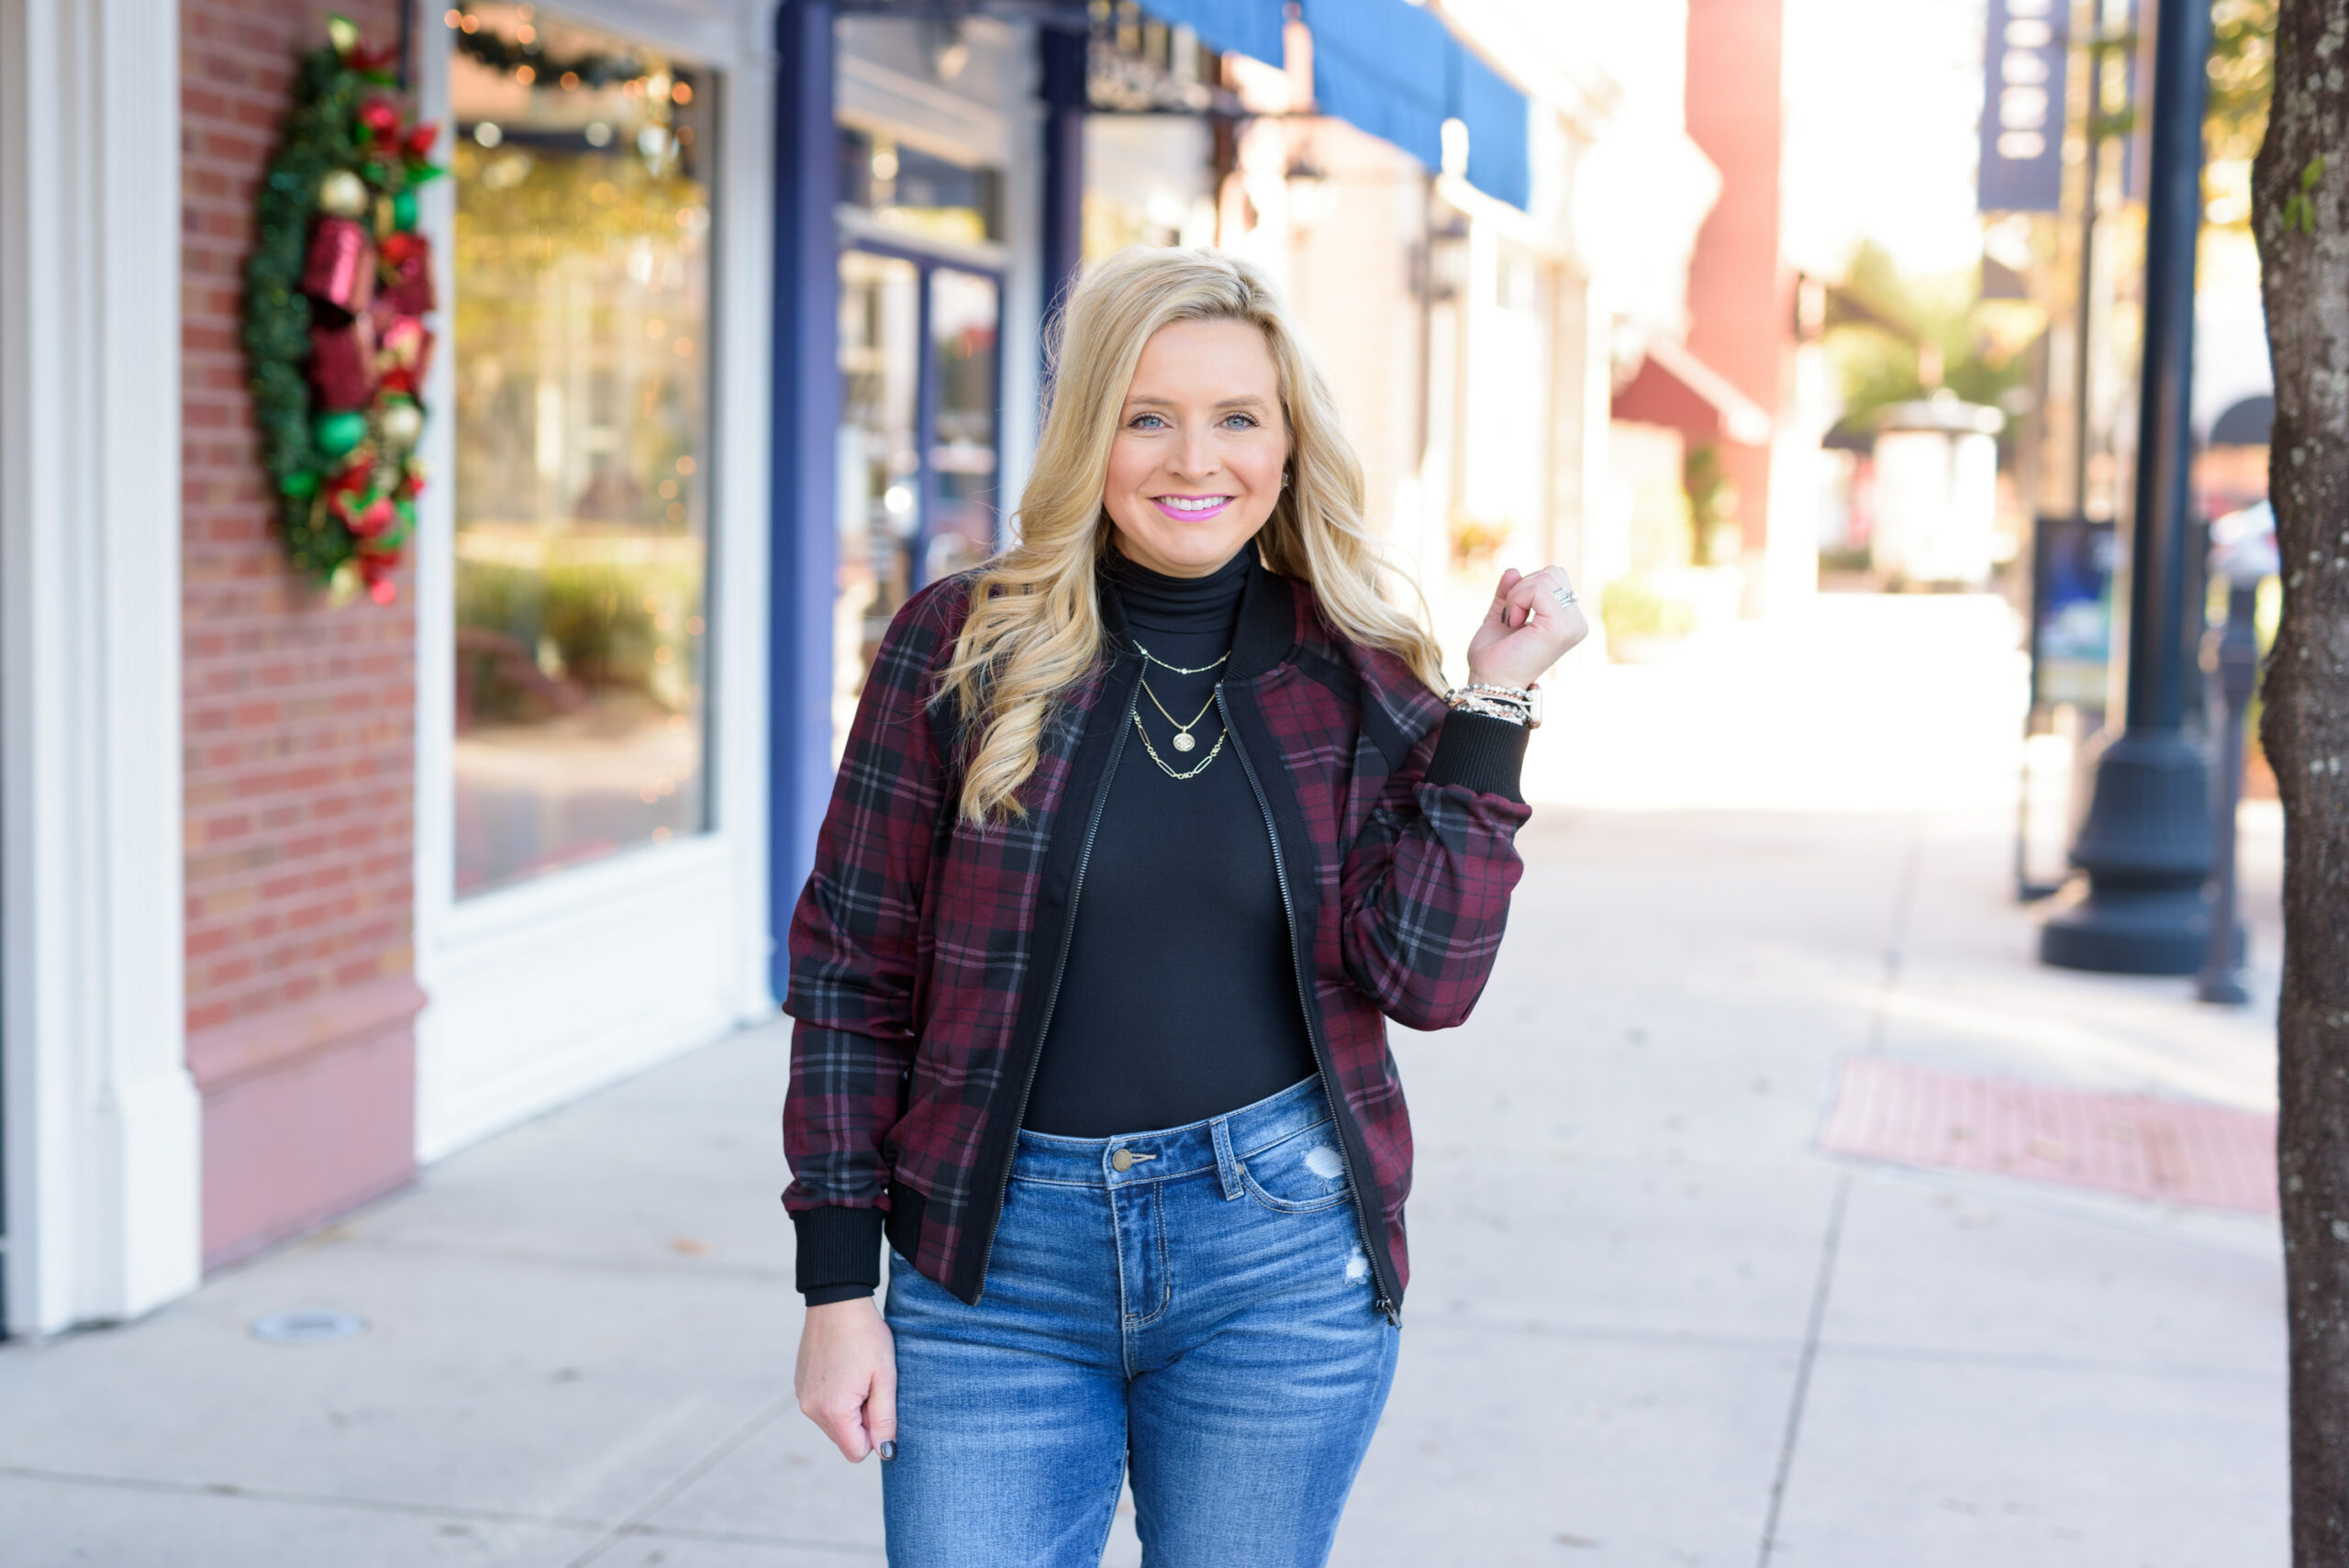 Winter Outfits by popular Houston fashion blog, Fancy Ashley: image of a woman standing outside and wearing Liverpool Los Angeles jeans, black turtleneck top, black ankle boots, and plaid jacket.